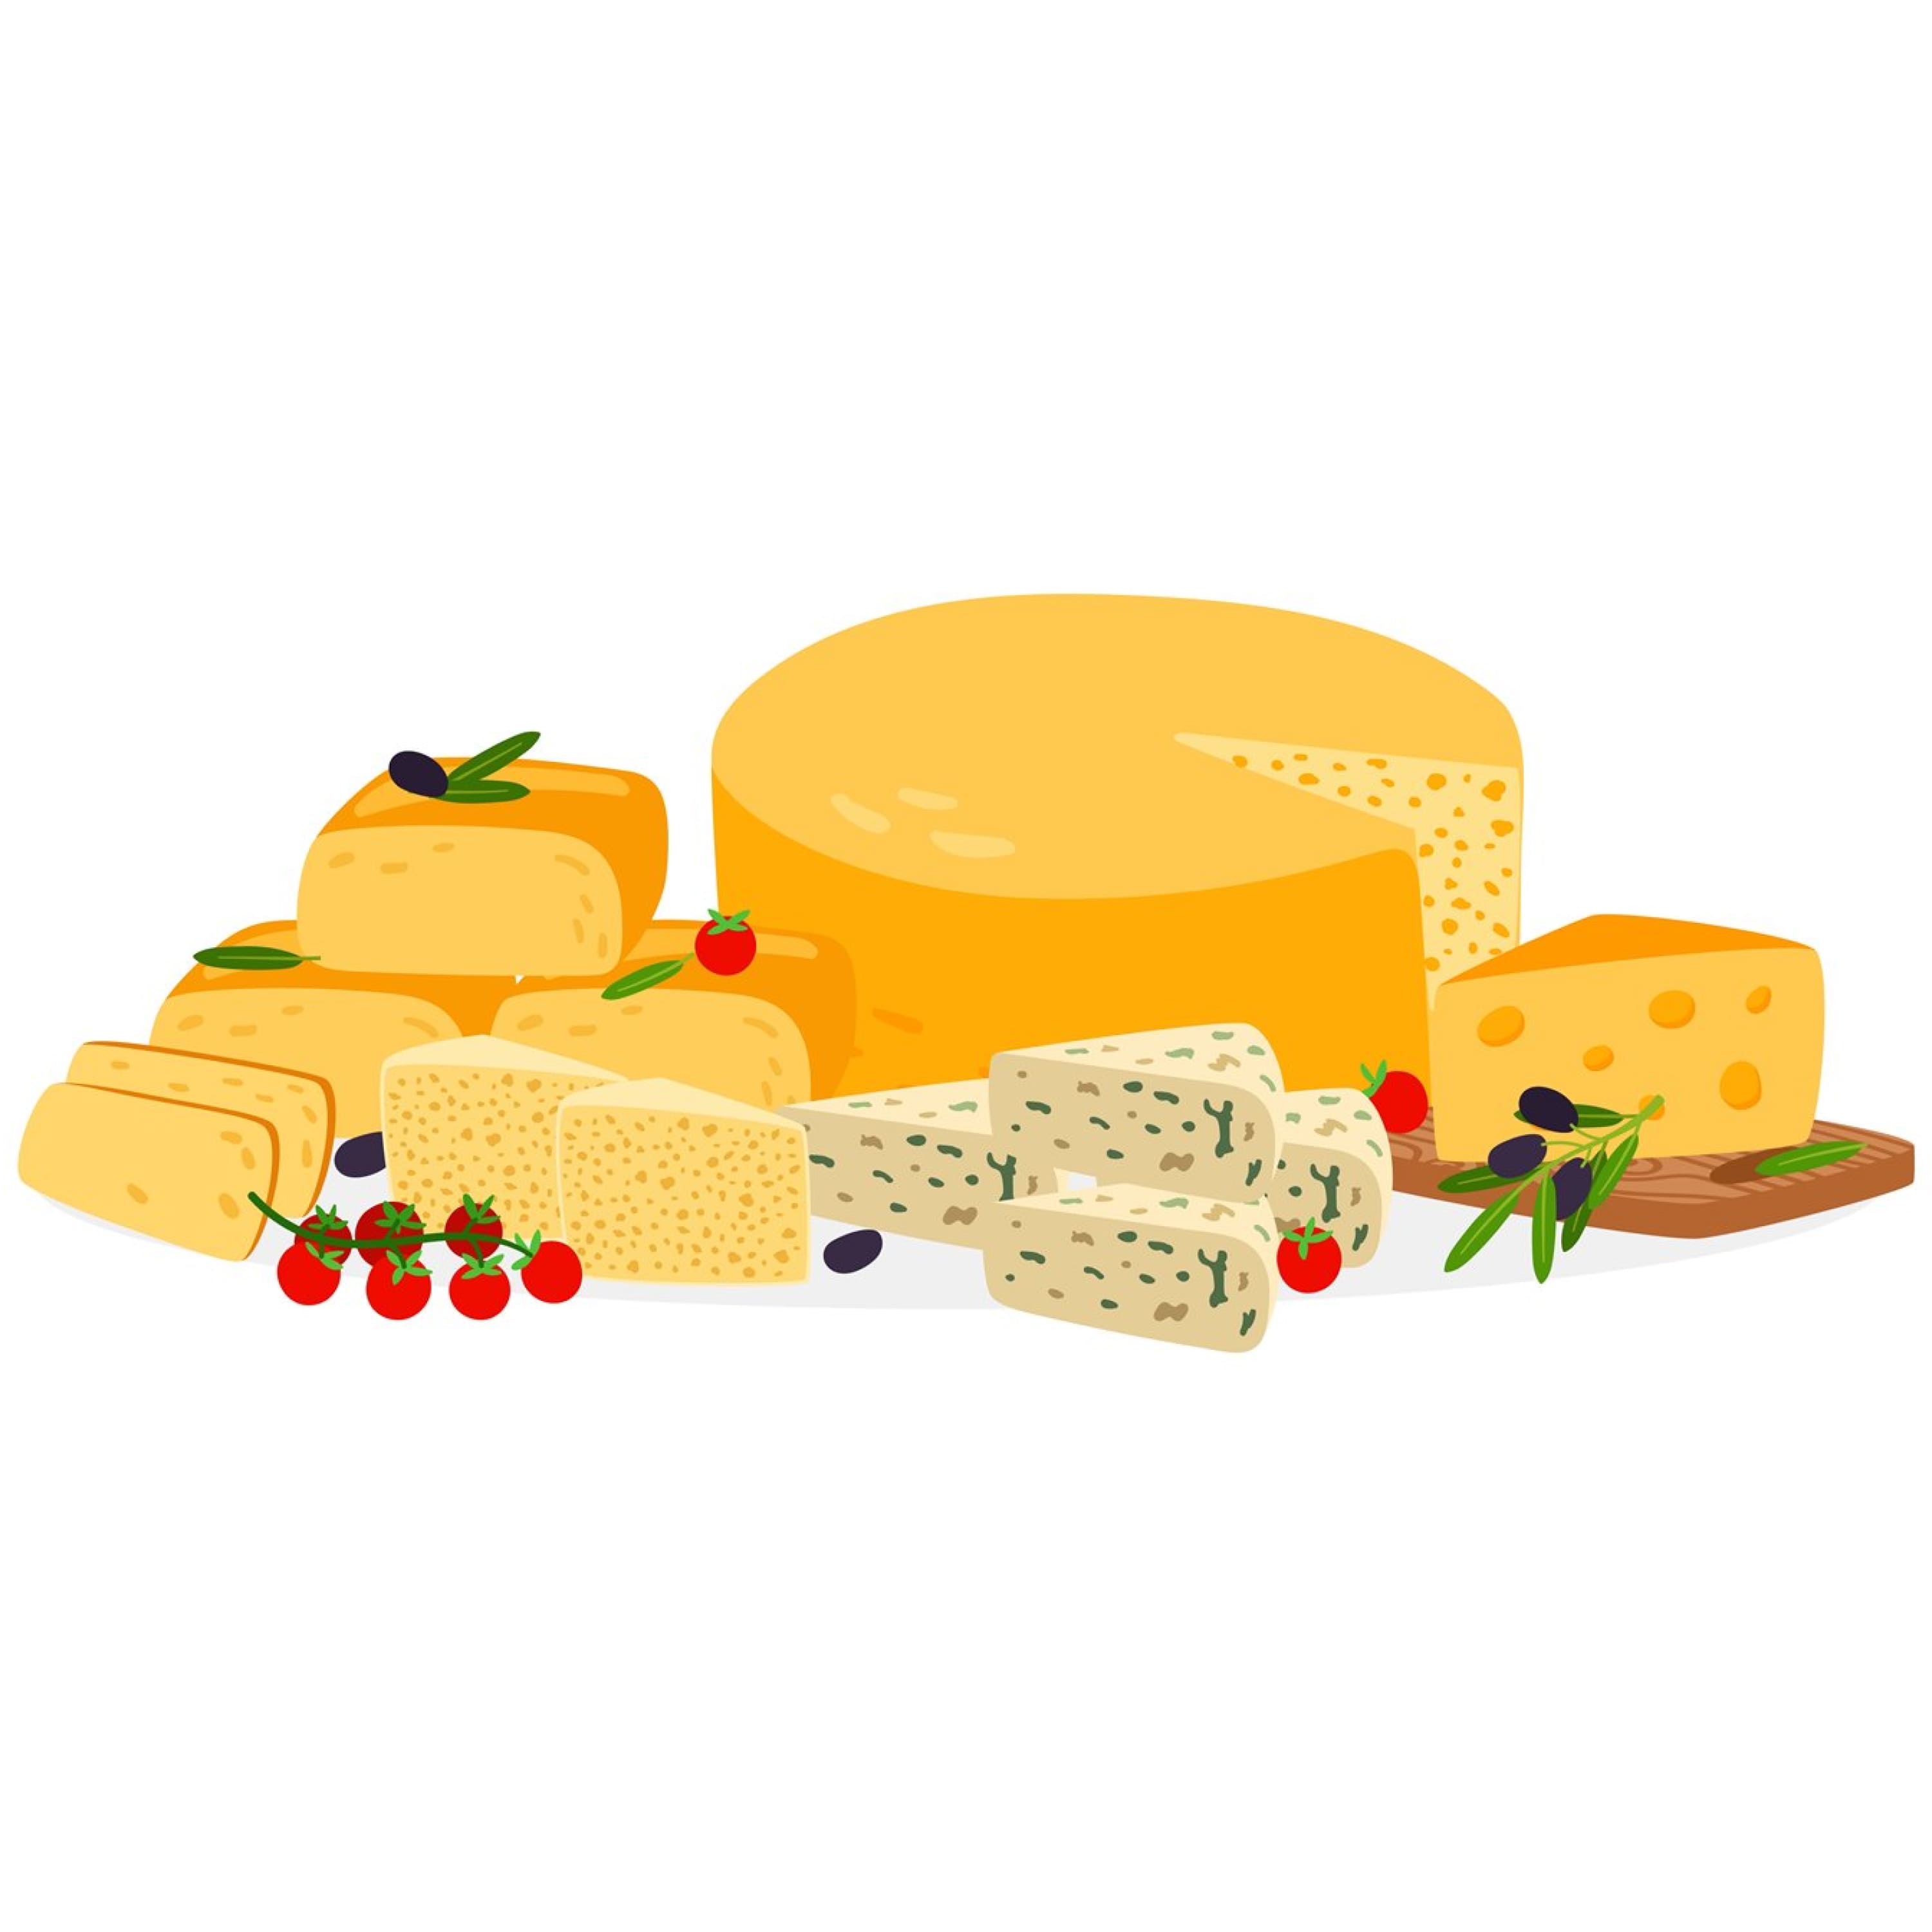 Collection of colorful images of farm cheeses.